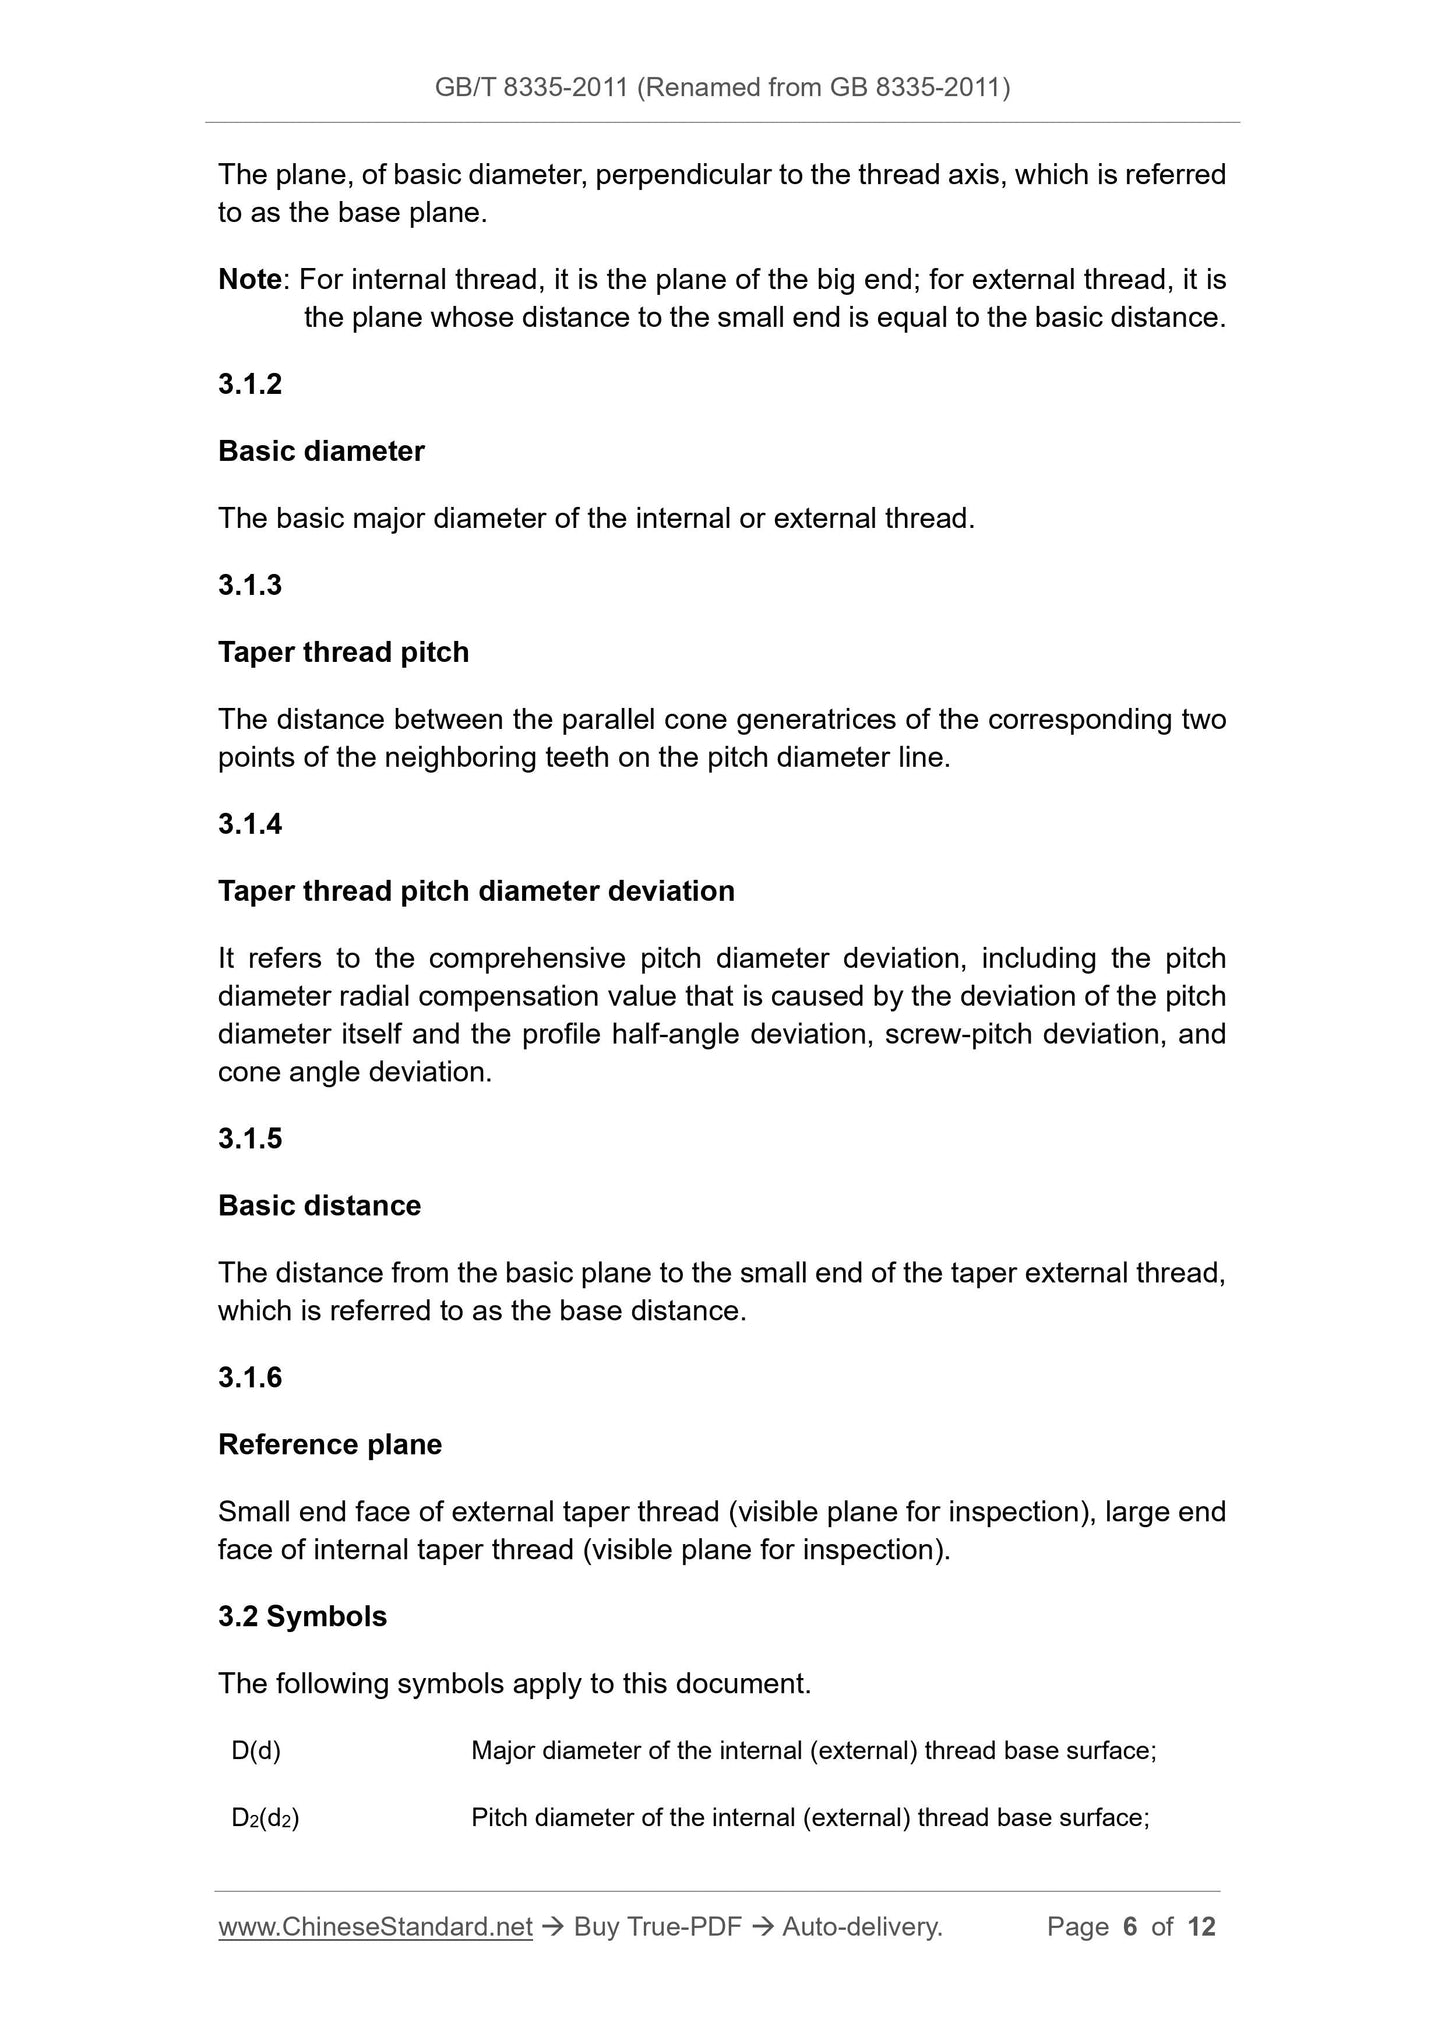 GB 8335-2011 Page 4